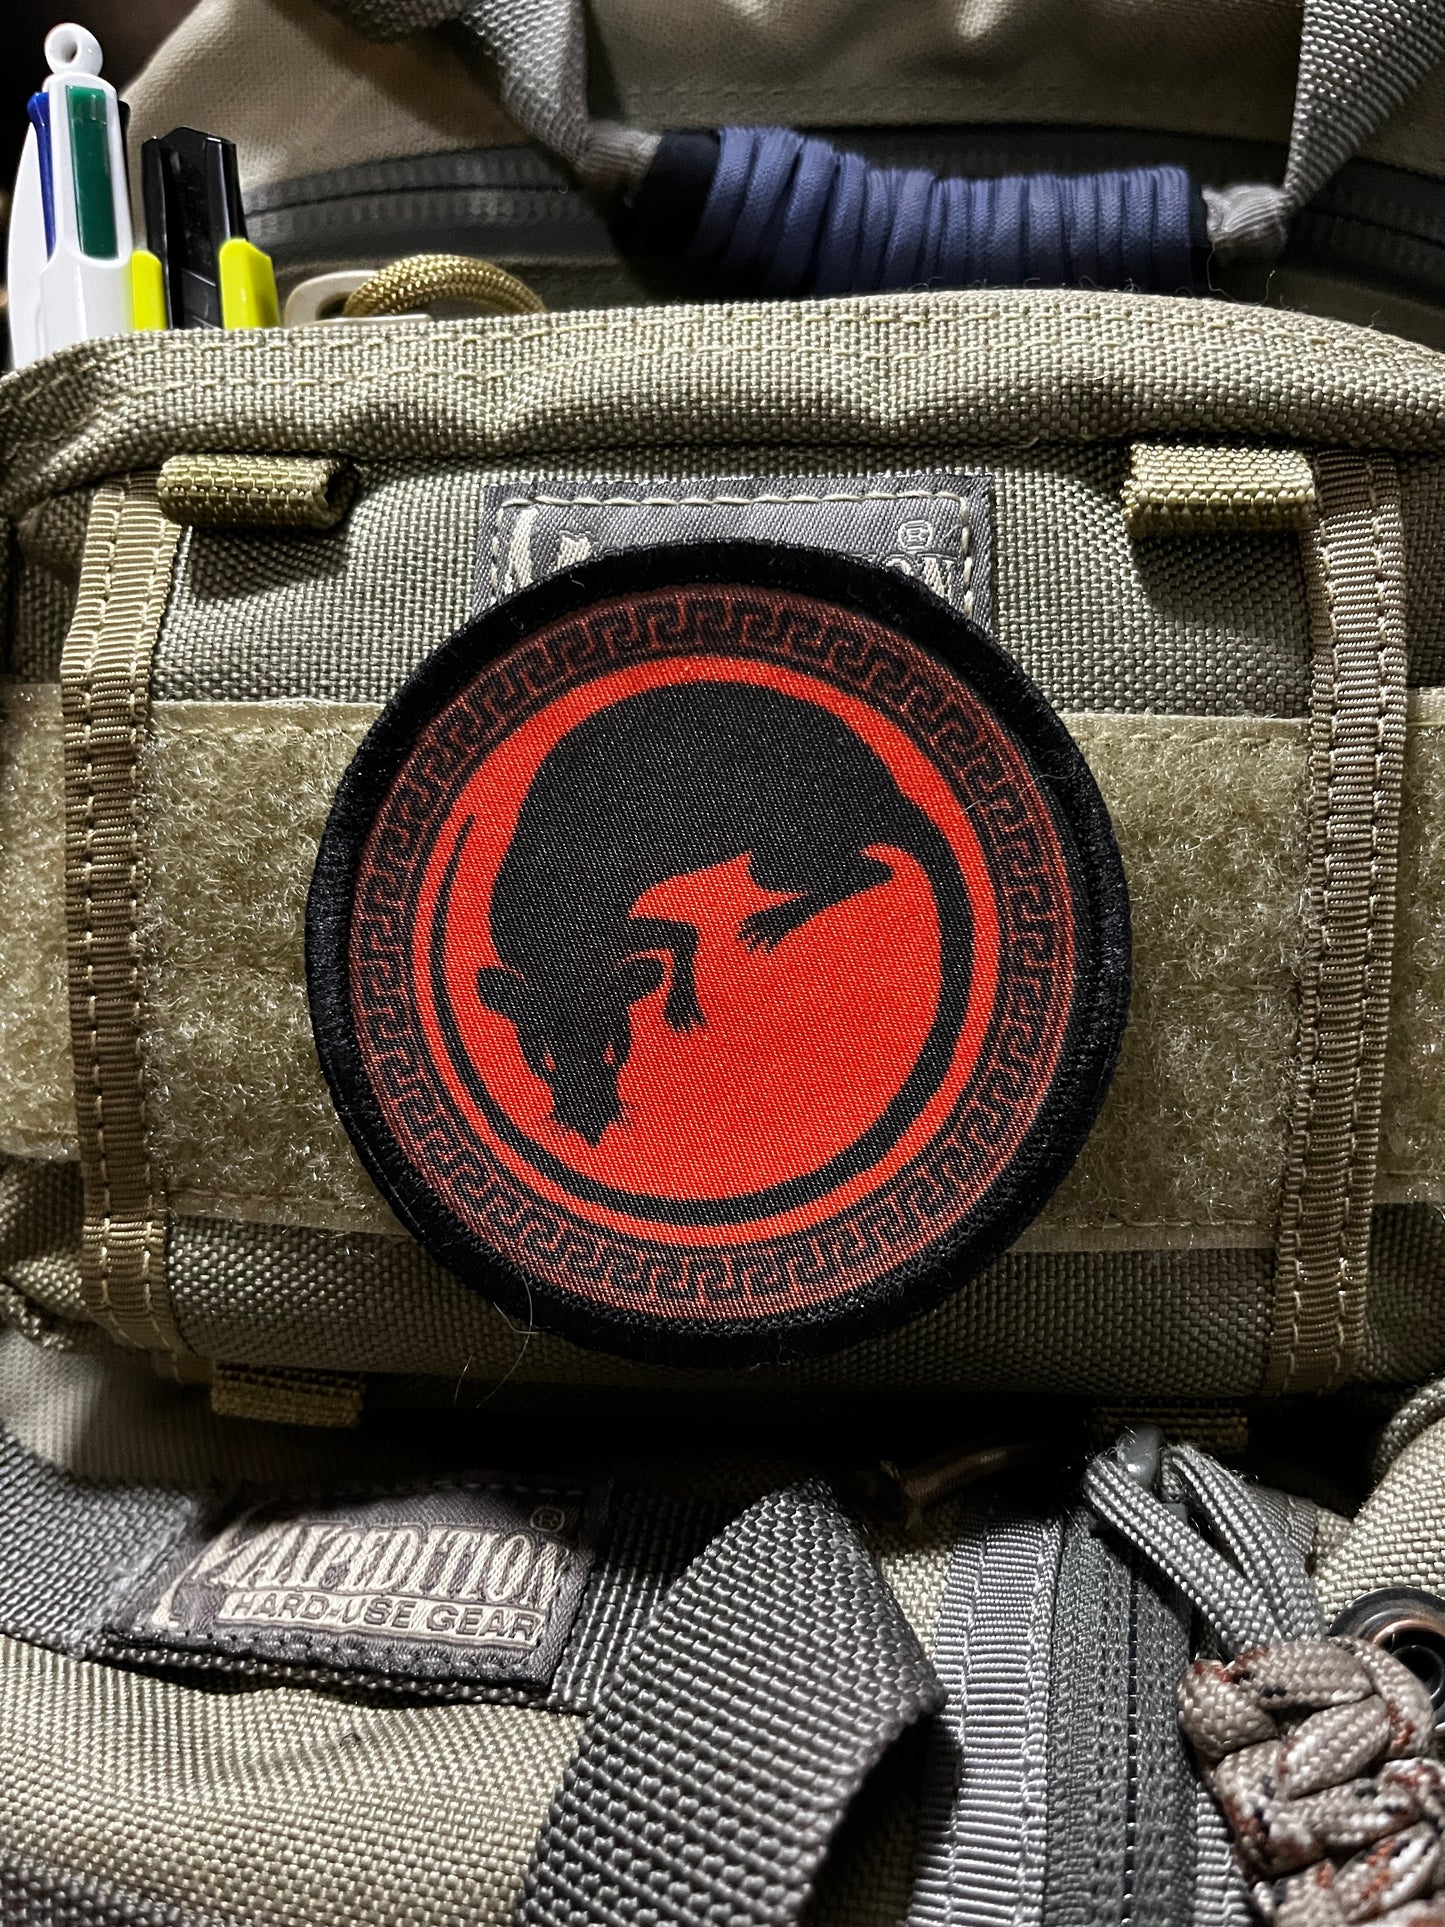 3" Rat Army Ender's Game Morale Patch Morale Patches Redheaded T Shirts 